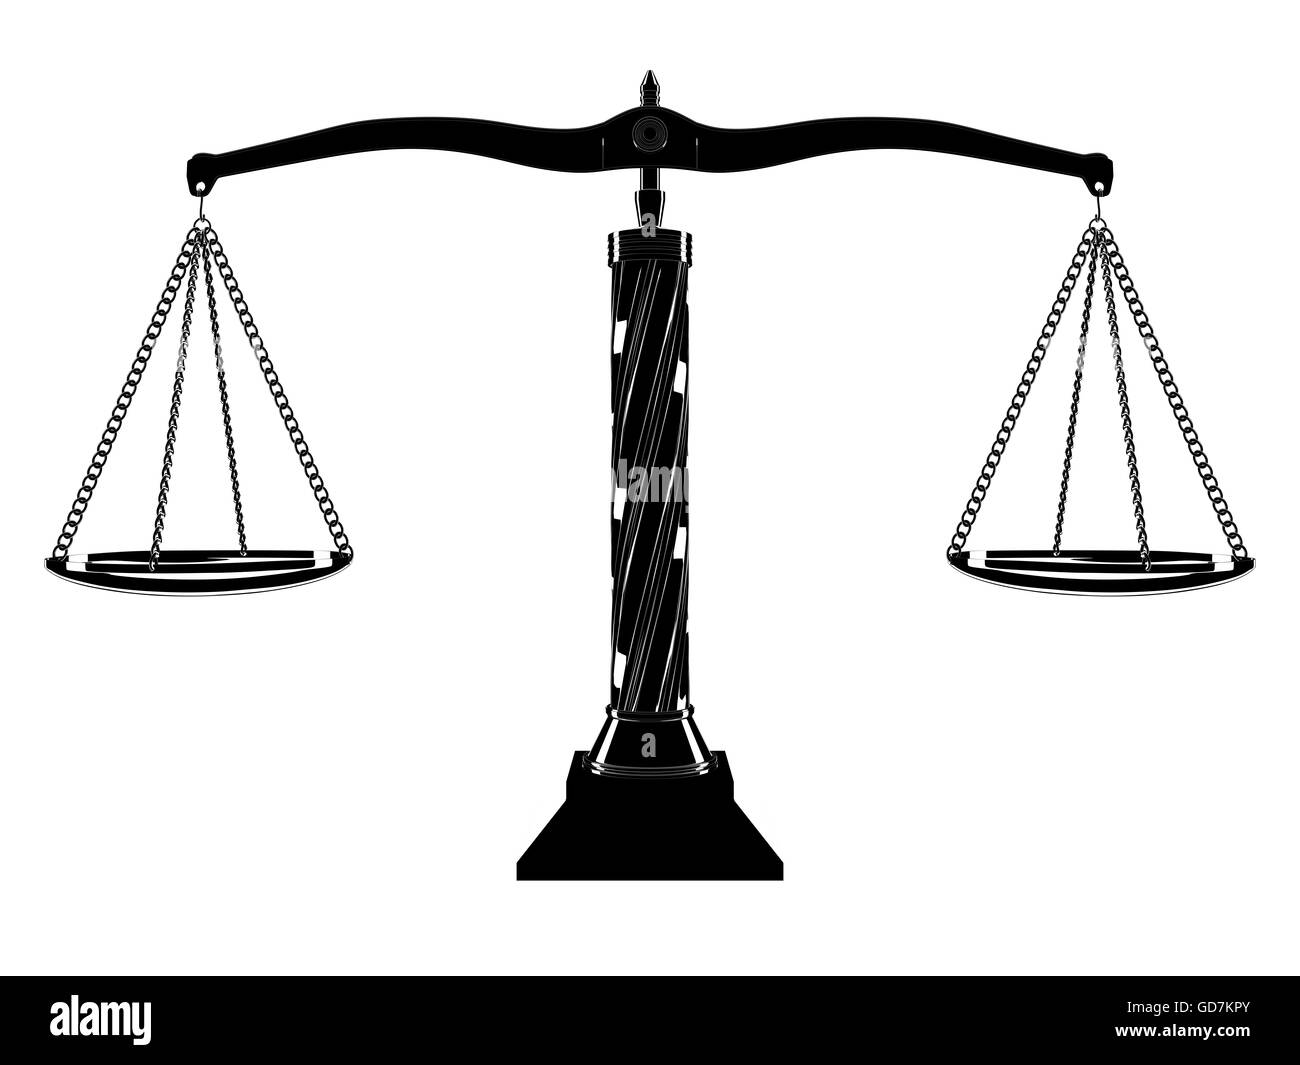 Black and white iconic balanced scale isolated on a white background. 3D Illustration. Stock Photo